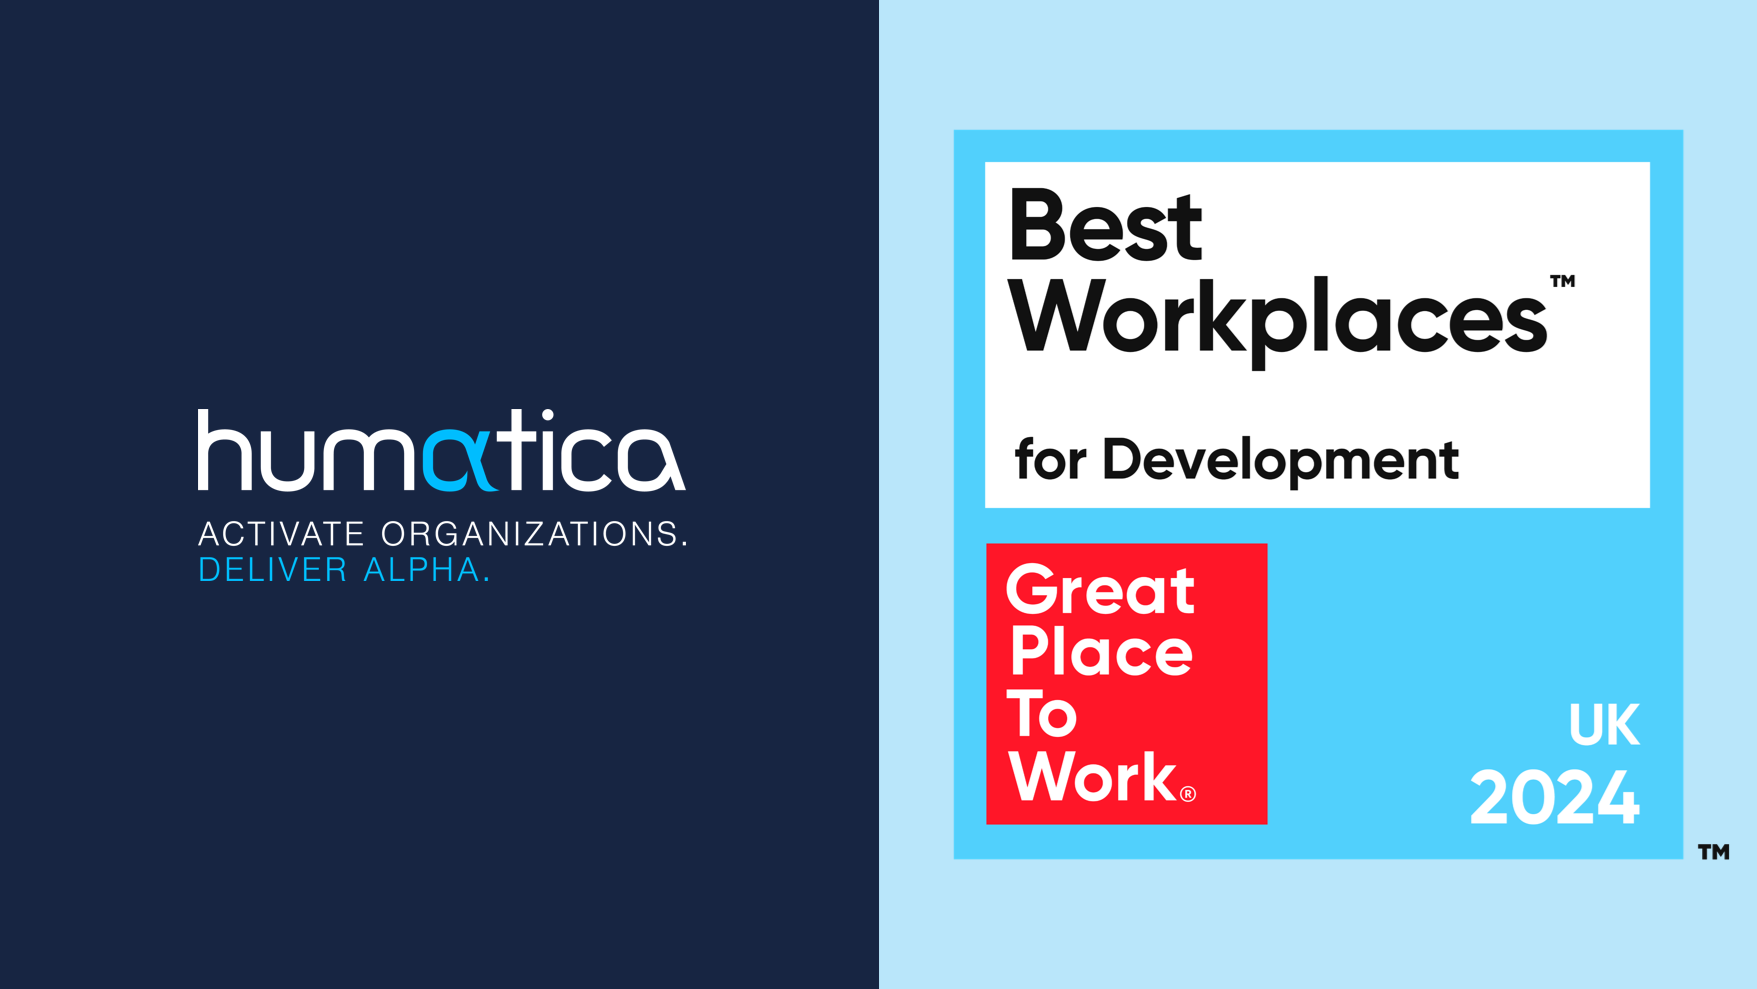 Humatica recognised in UK’s Best Workplaces for Development™ 2024 List!